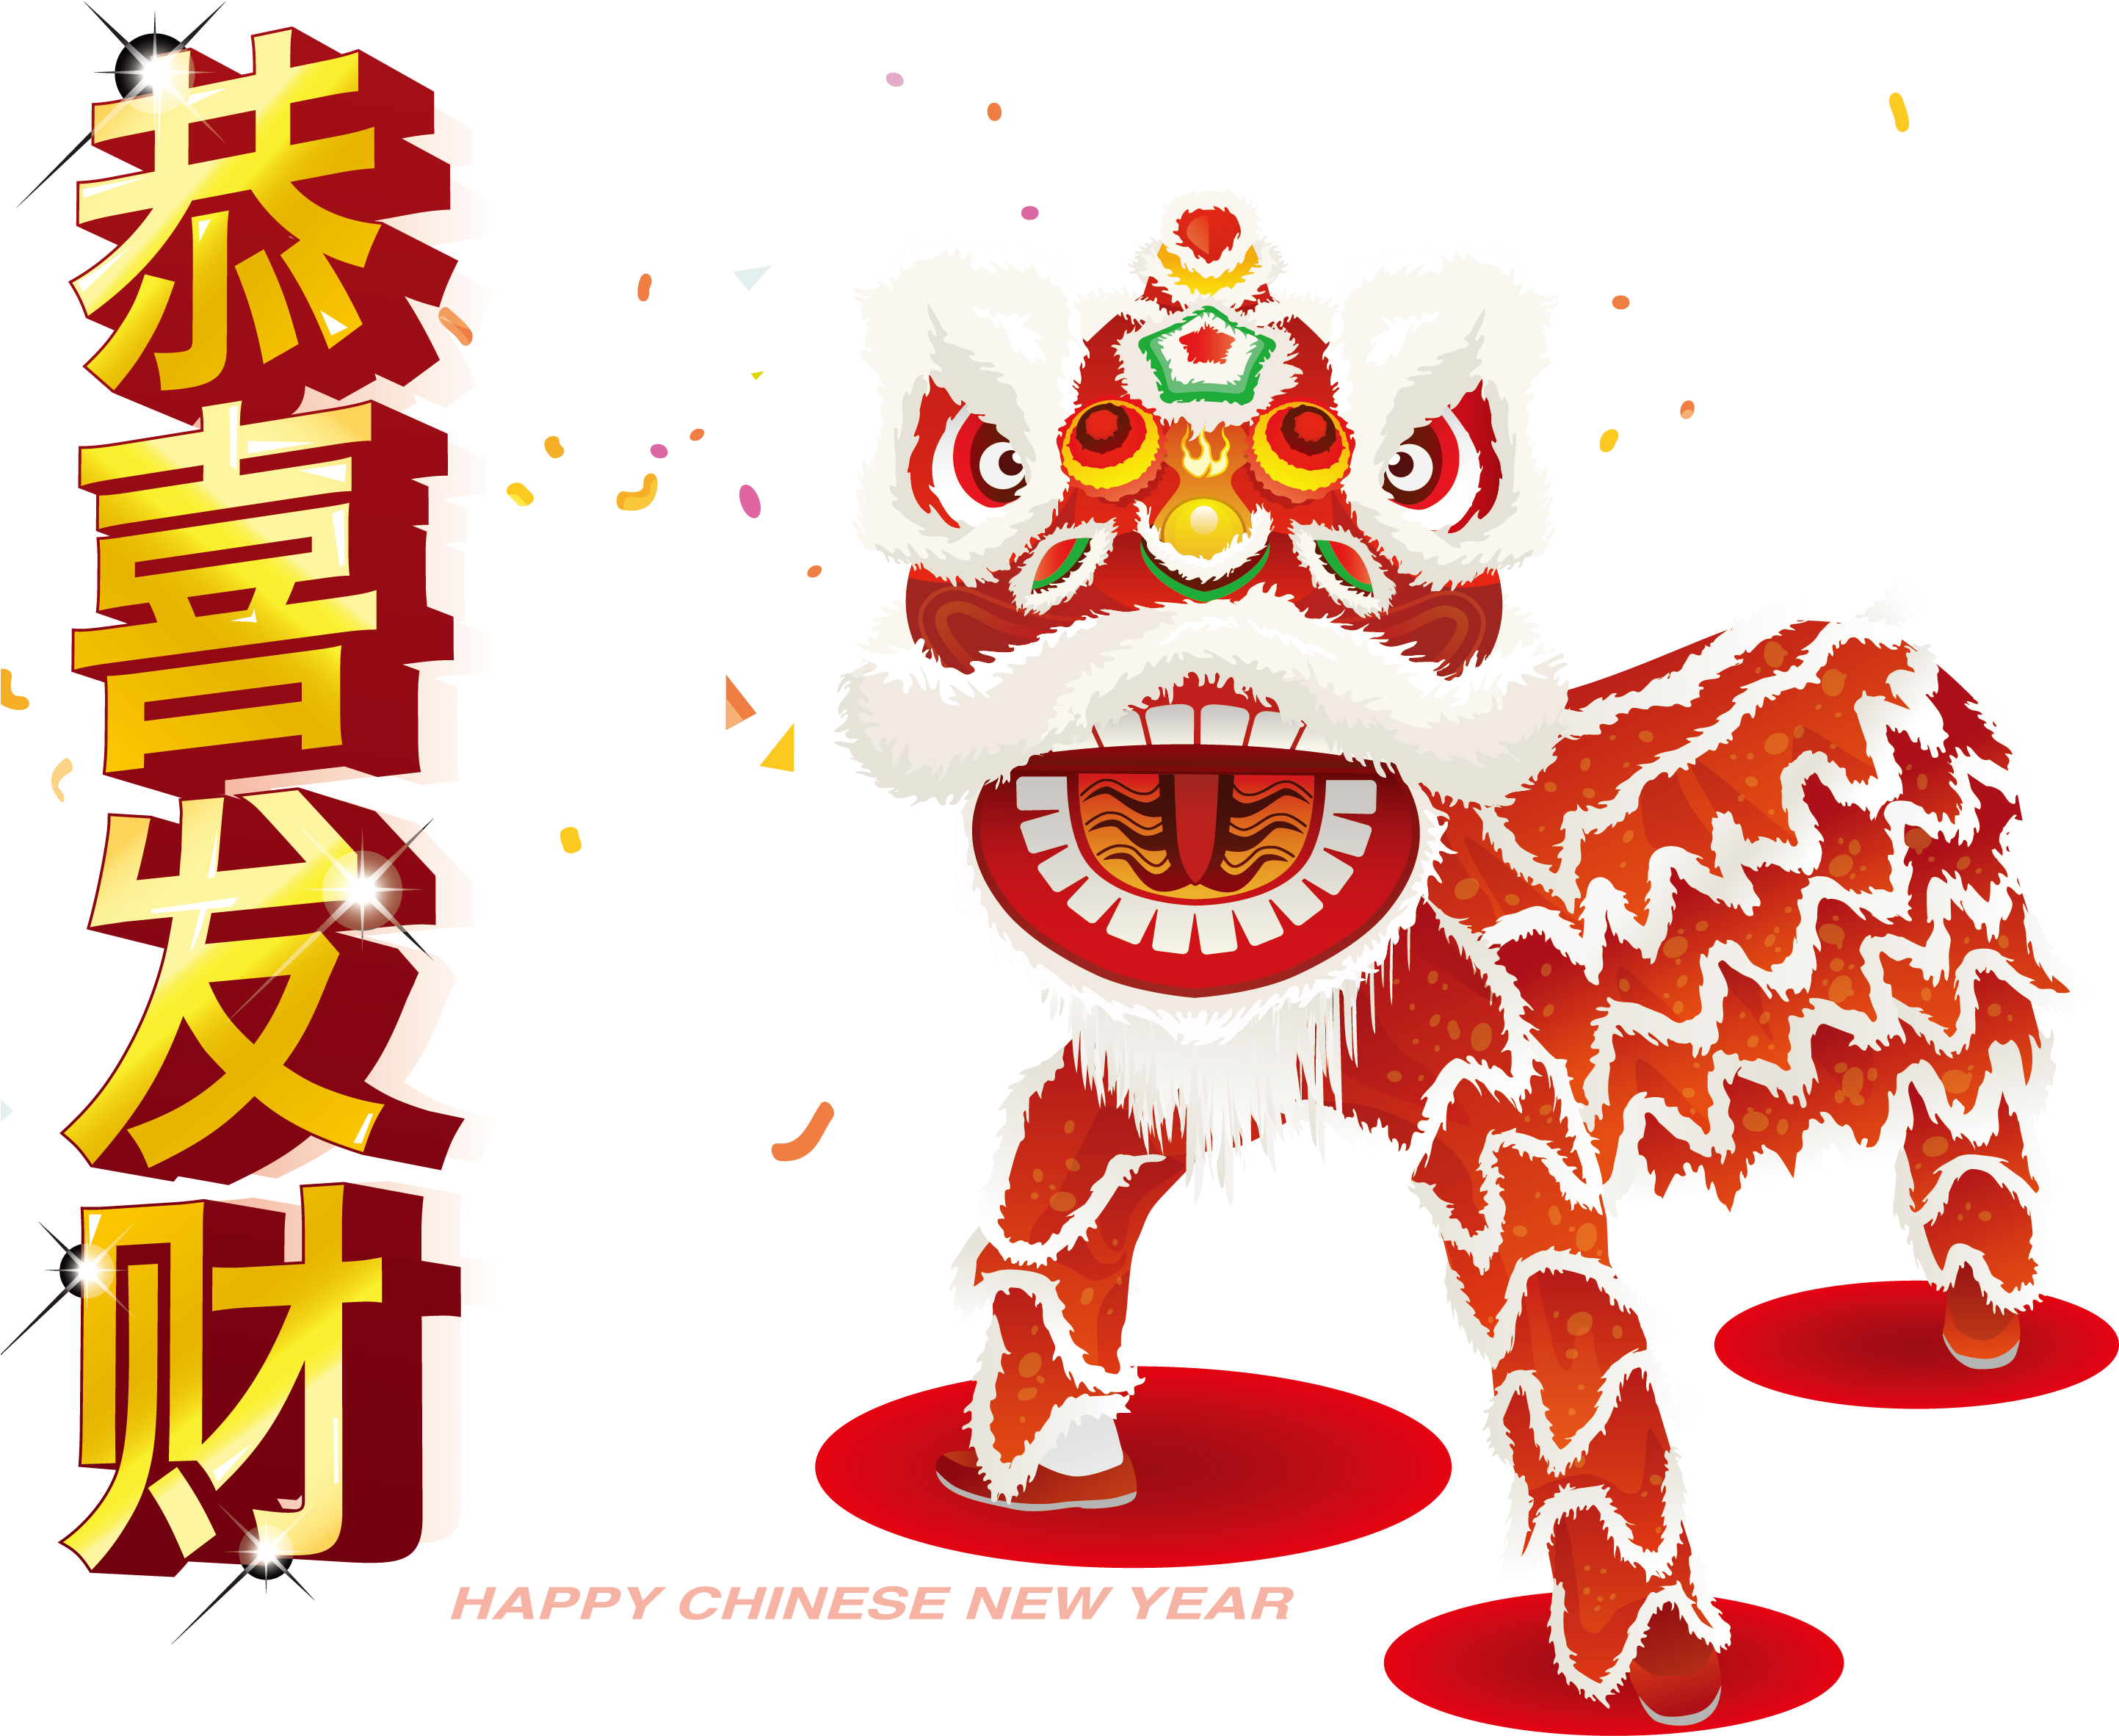 Festival Chinese New Year Lion Dance - Chinese Lion Dance Background (2885x2419)